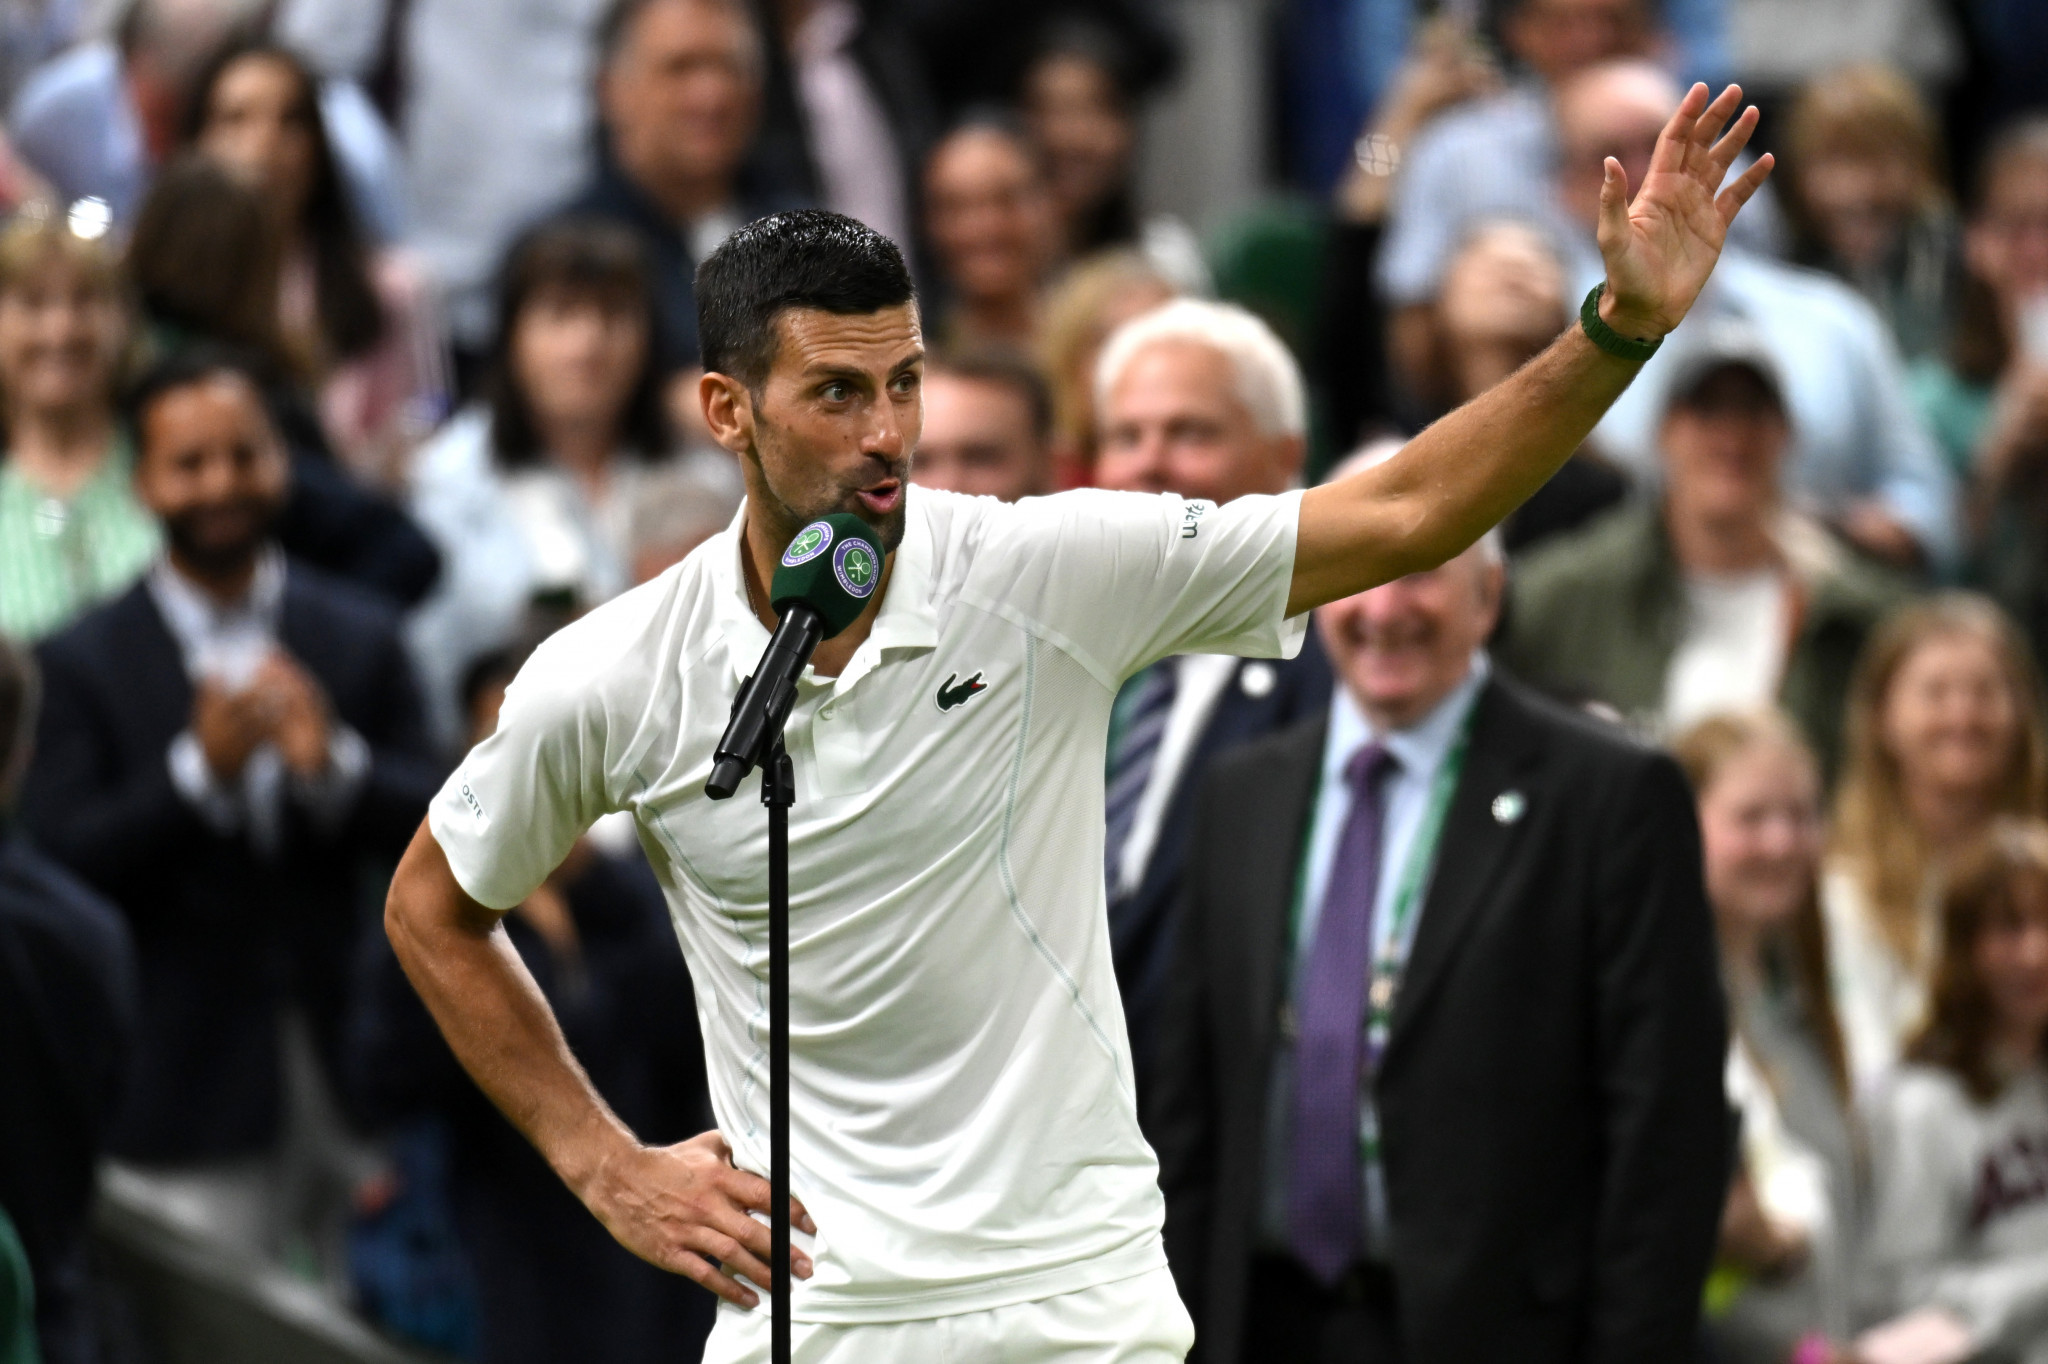 Novak Djokovic slammed the Wimbledon crowd after his victory over Holger Rune. GETTY IMAGES